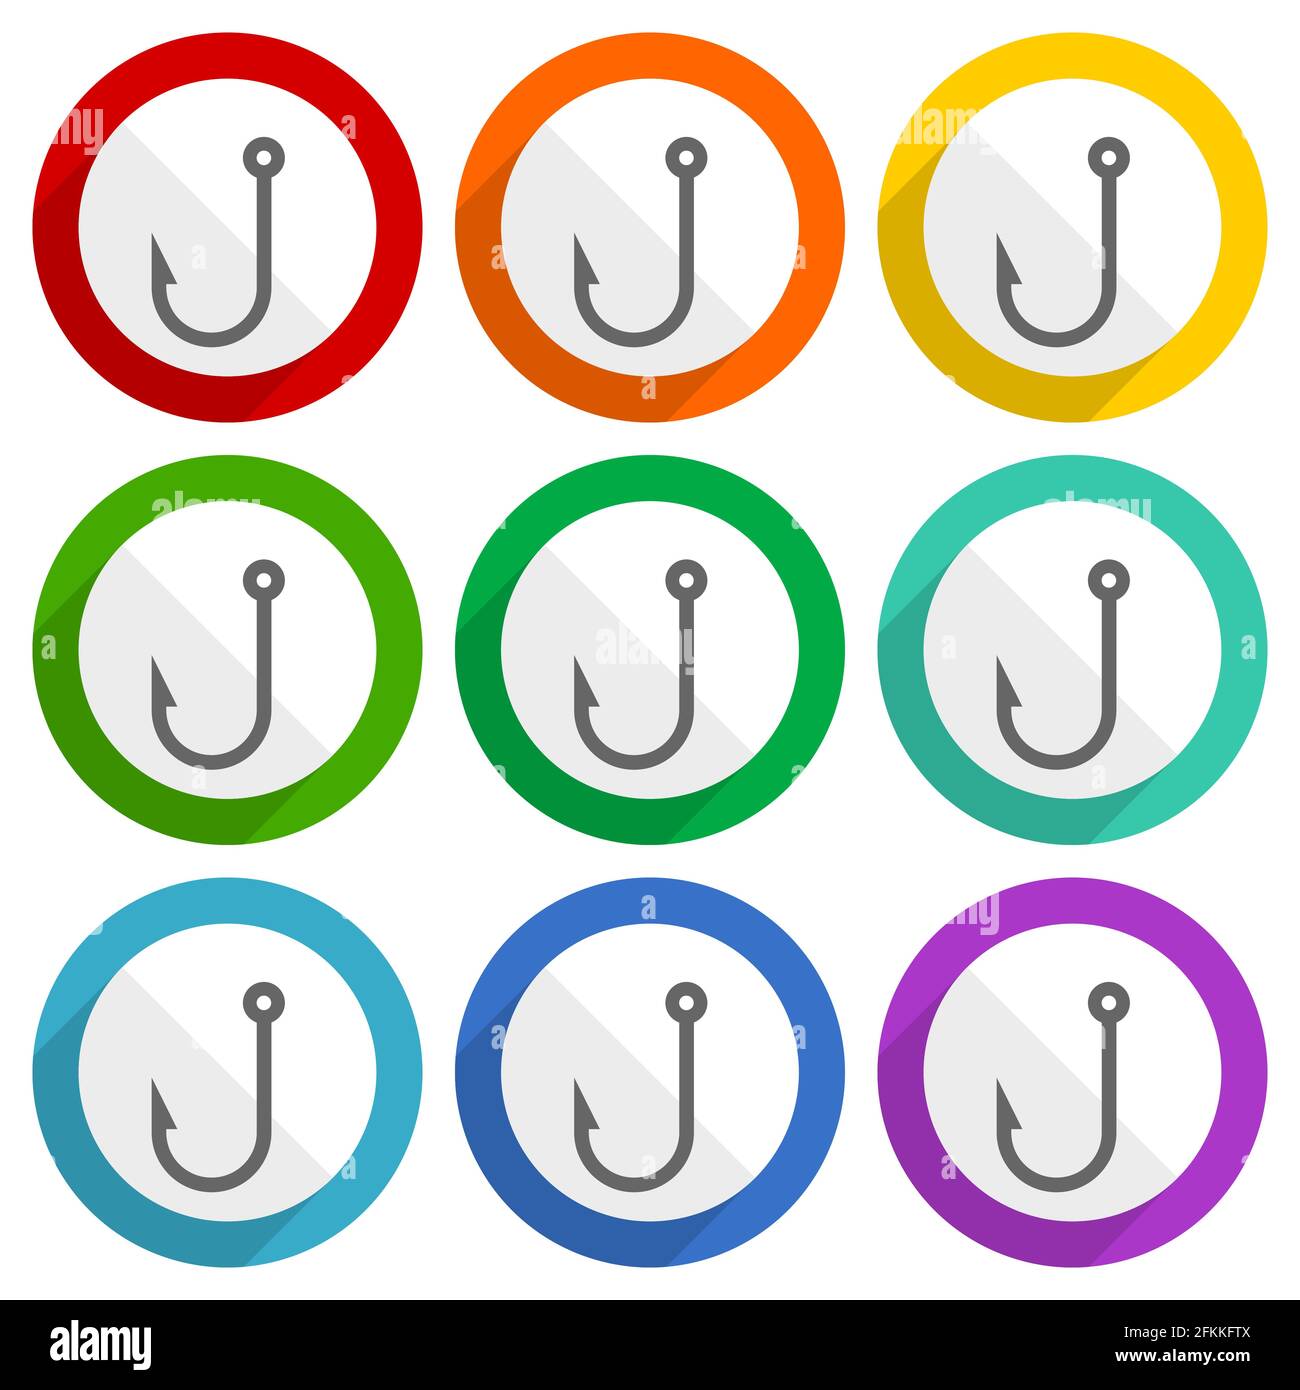 Fishing hook vector icons, set of colorful flat design buttons for